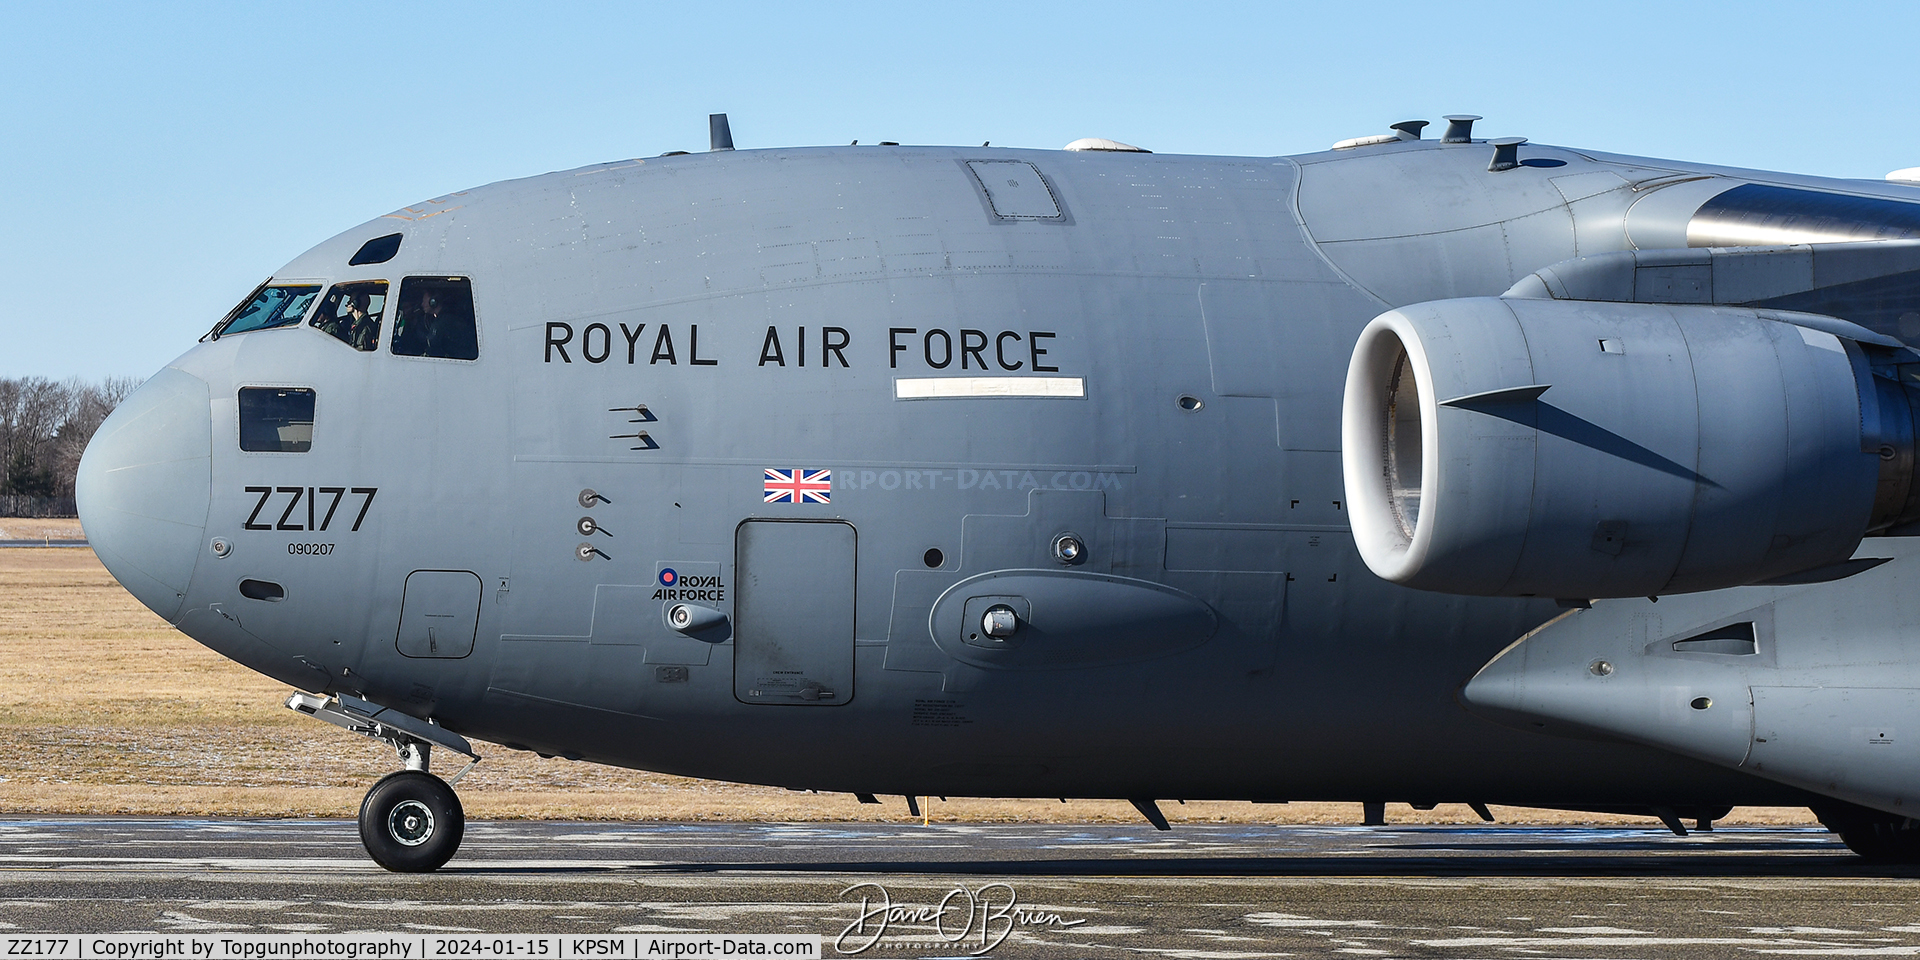 ZZ177, 2010 Boeing C-17A Globemaster III C/N F-227, Royal Air Force C-17 out of Brize Norton